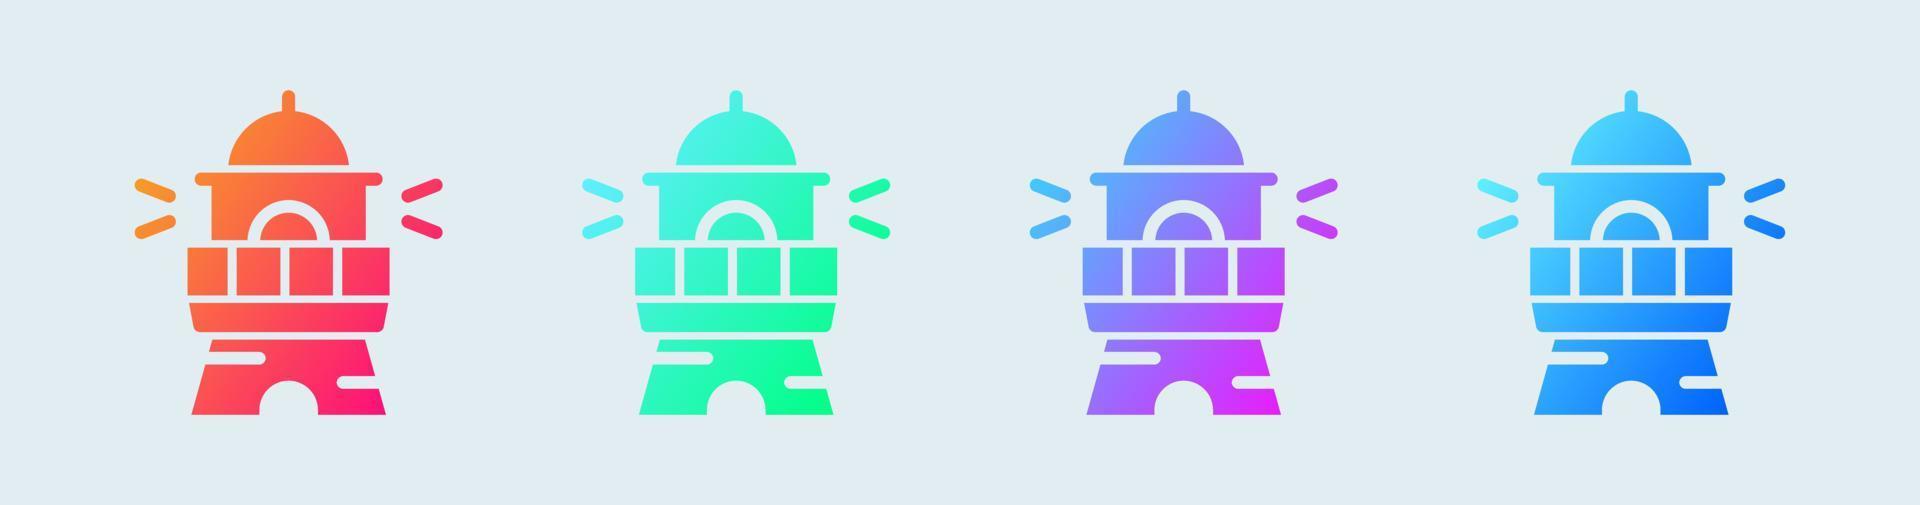 Lighthouse solid icon in gradient colors. Beacon light signs vector illustration.